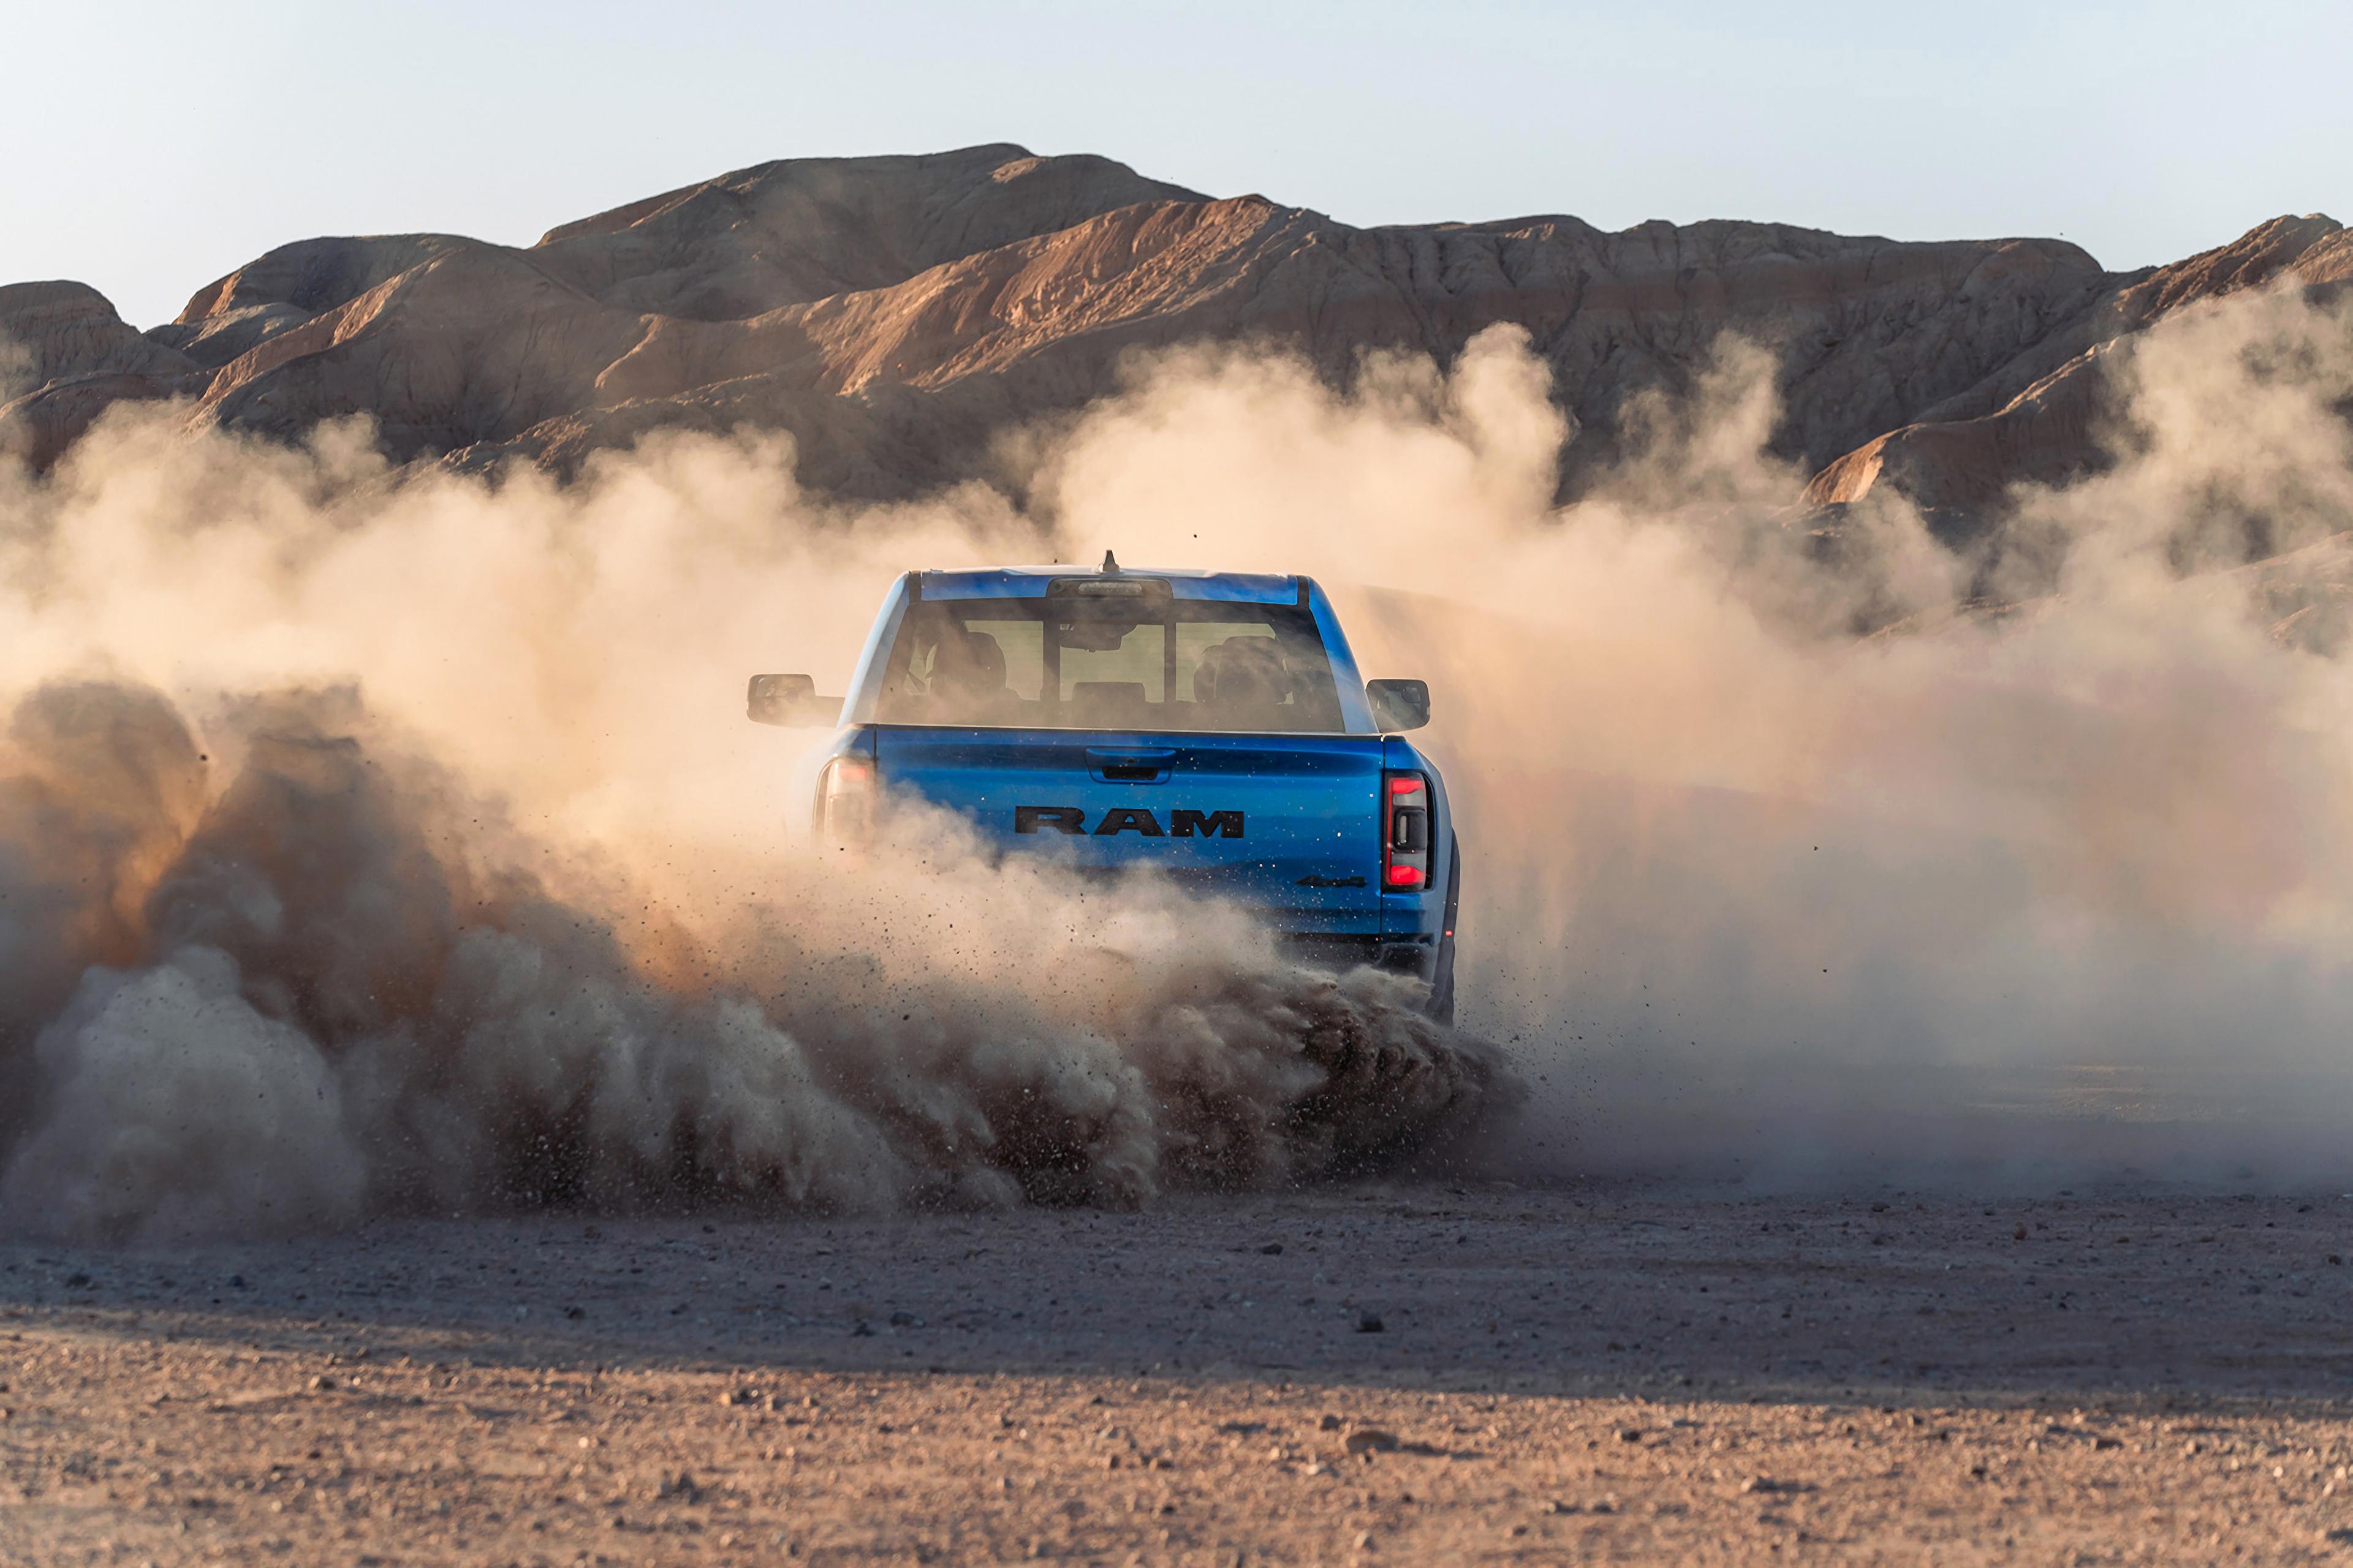 Cooling a ford in the desert